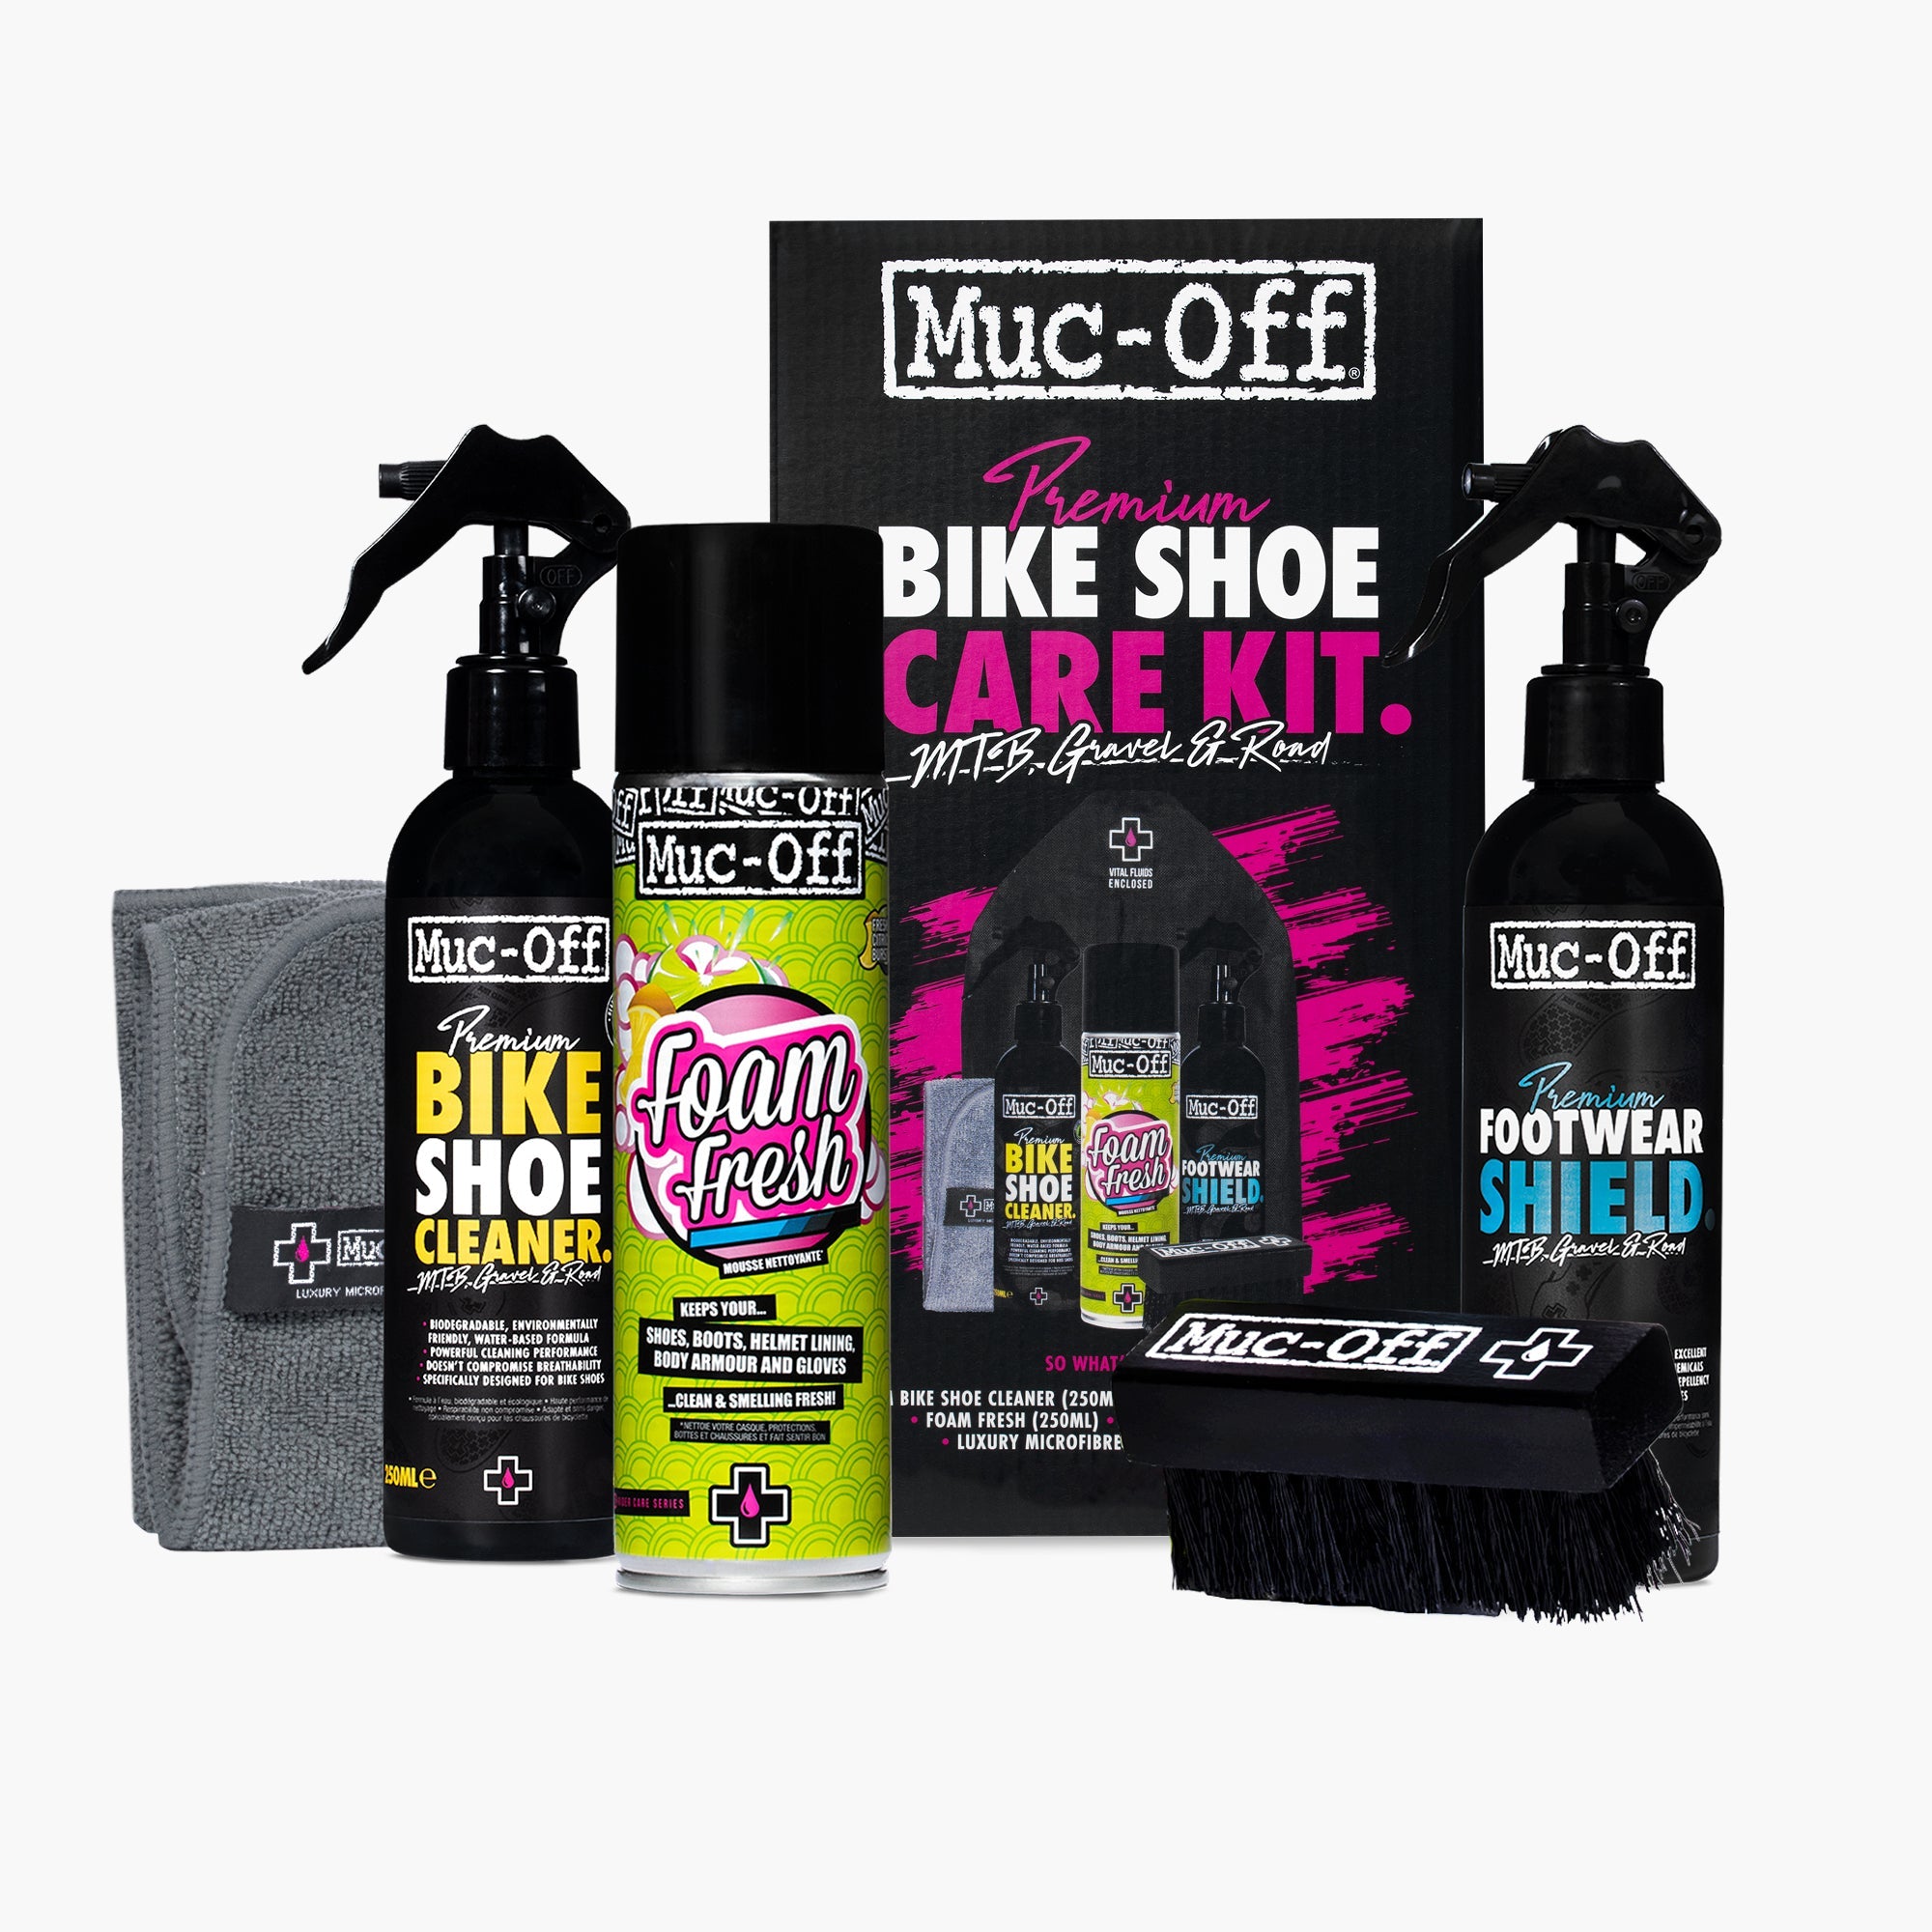 Buy Muc-off Bicycle Care Products Online. Wide Range & Best Price